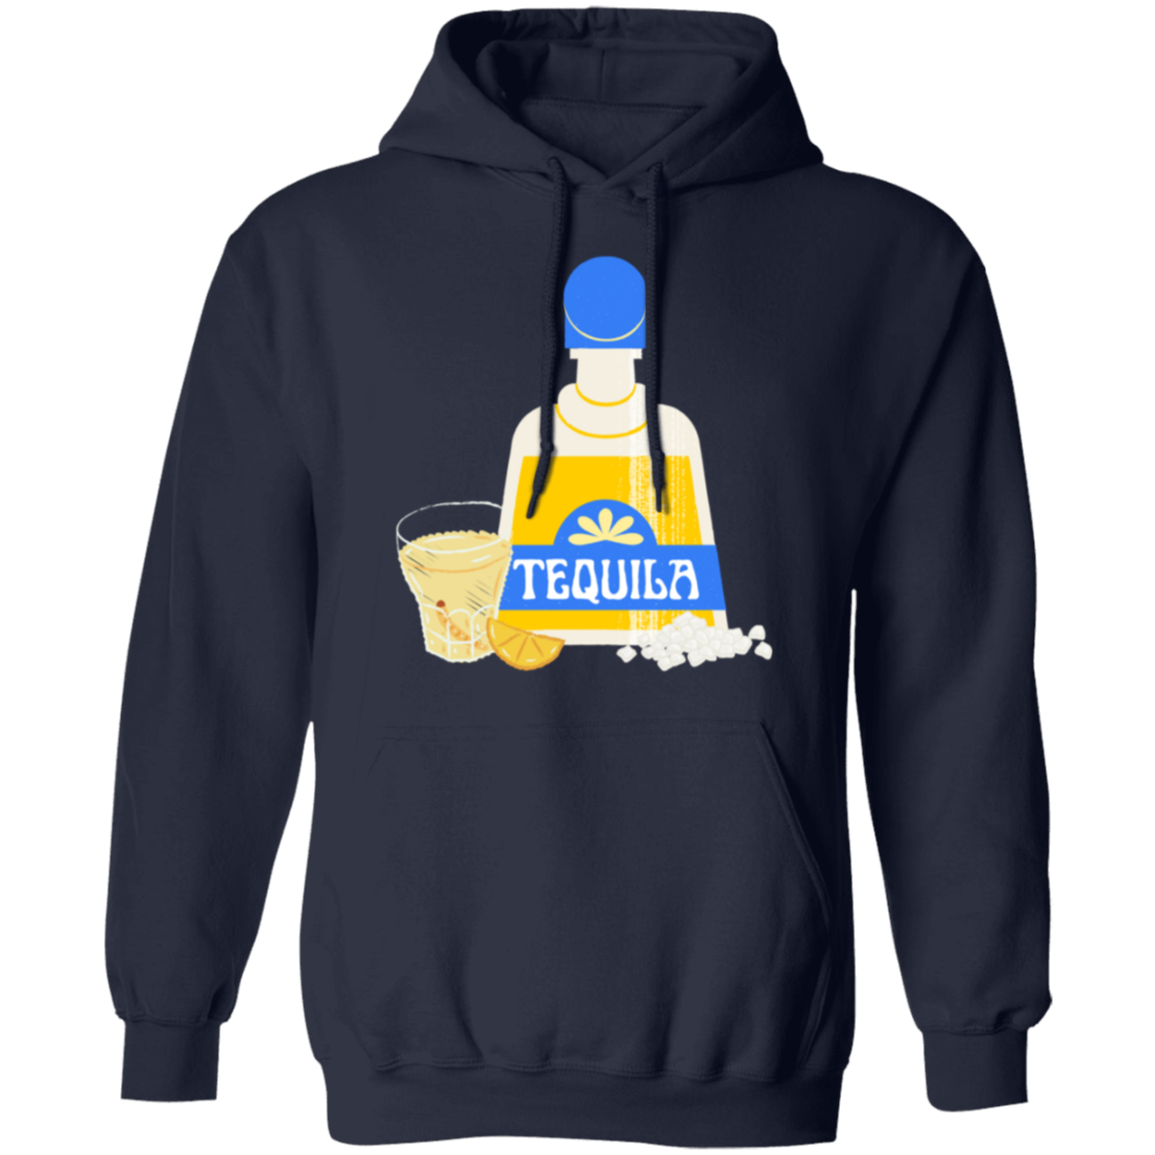 If You're Gonna Be Salty, At Least Bring the Tequila Hoodie